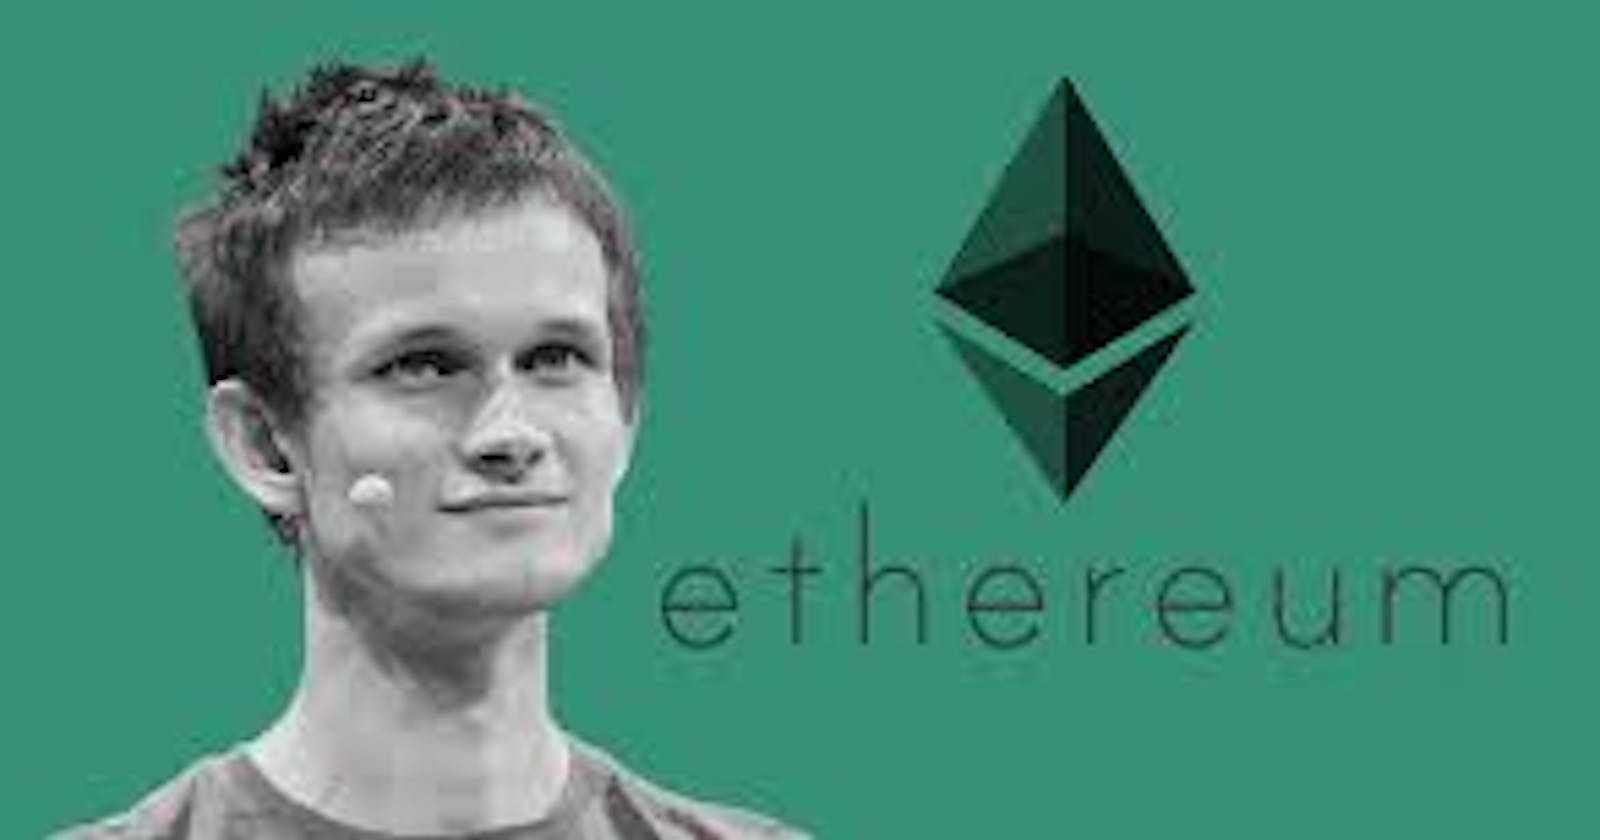 How to enter the world of Ethereum?